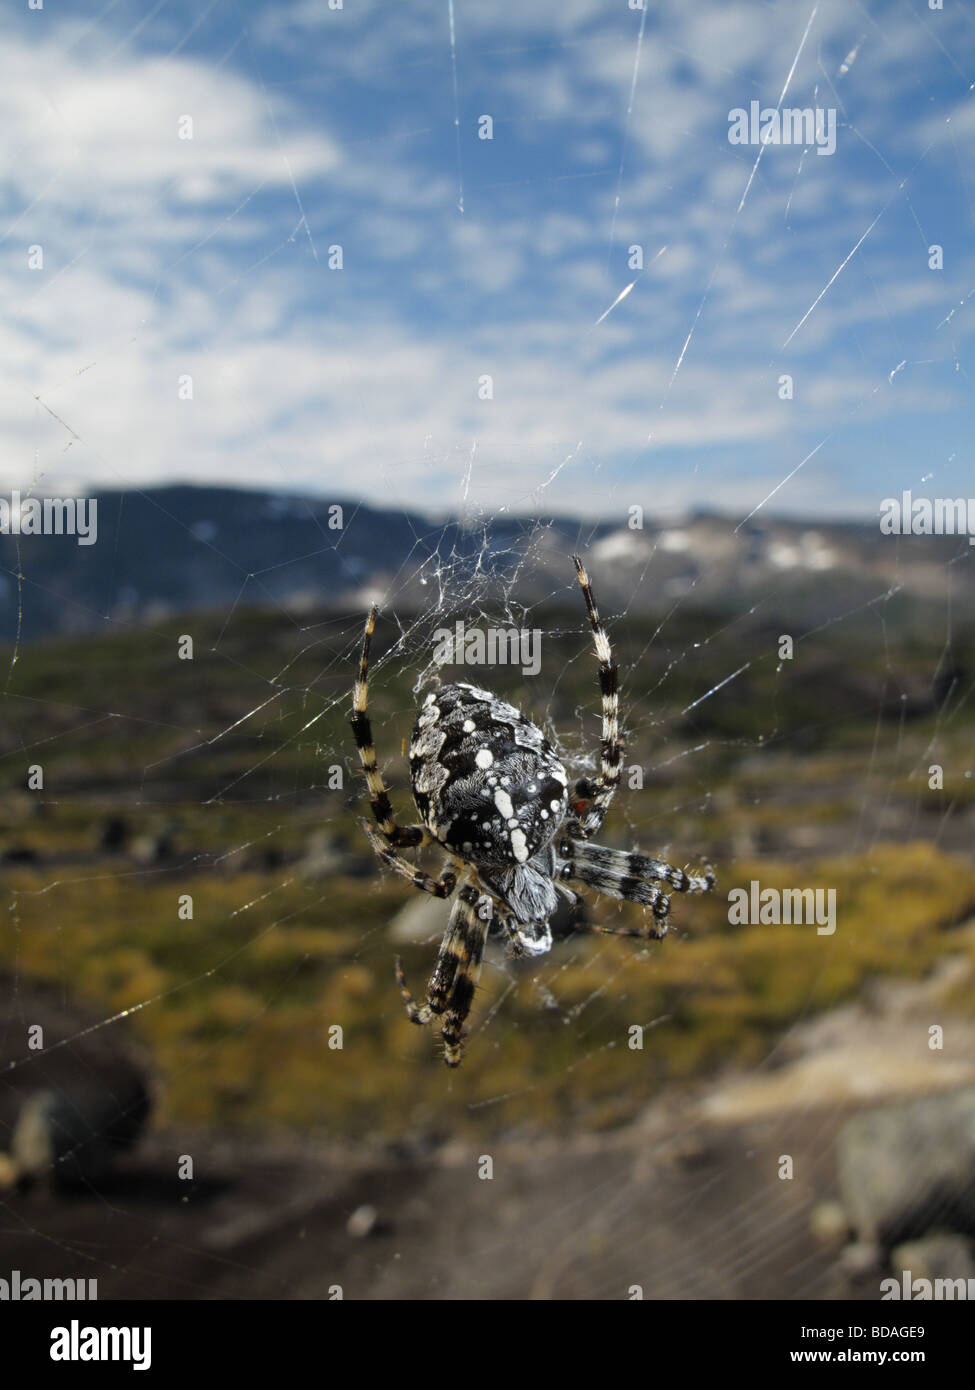 European Garden Spider or cross spider (Araneus diadematus) in Norway. The highlands can be seen in the background. Stock Photo